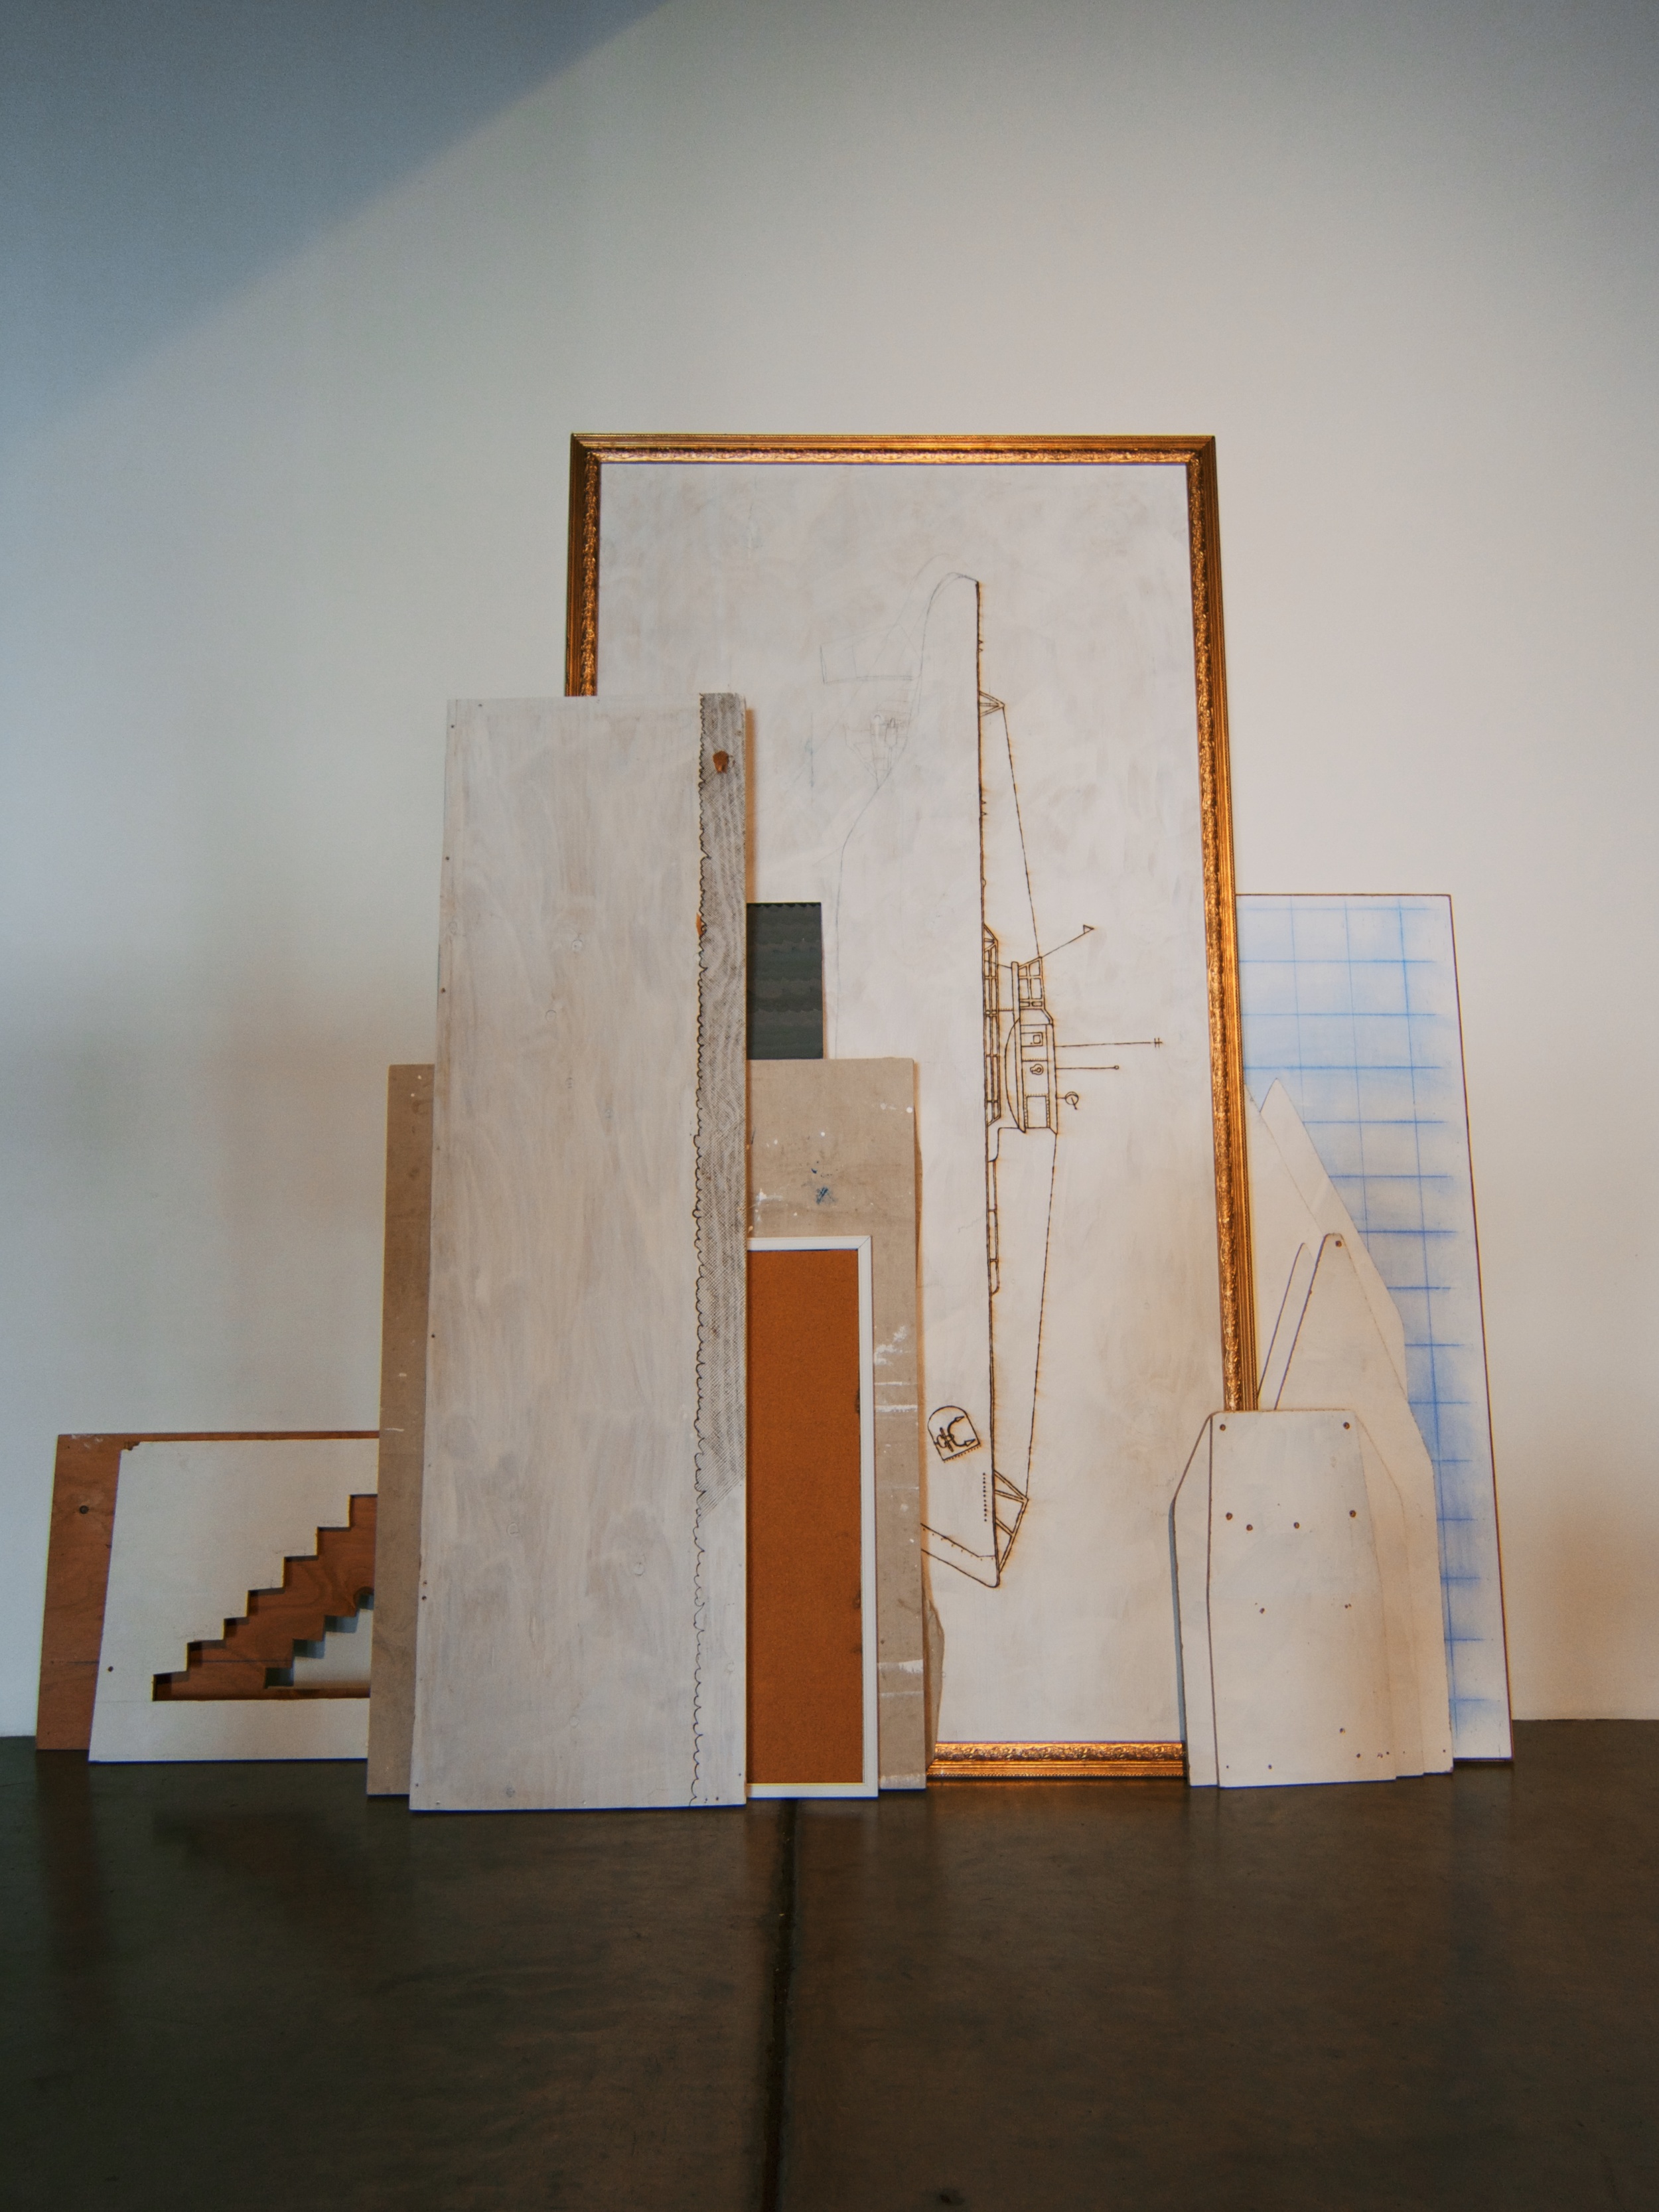  Various plywood scraps leaning against the wall containing abandoned projects that have been wood-burned, painted, and cut into, 8x8 feet, 2014. 